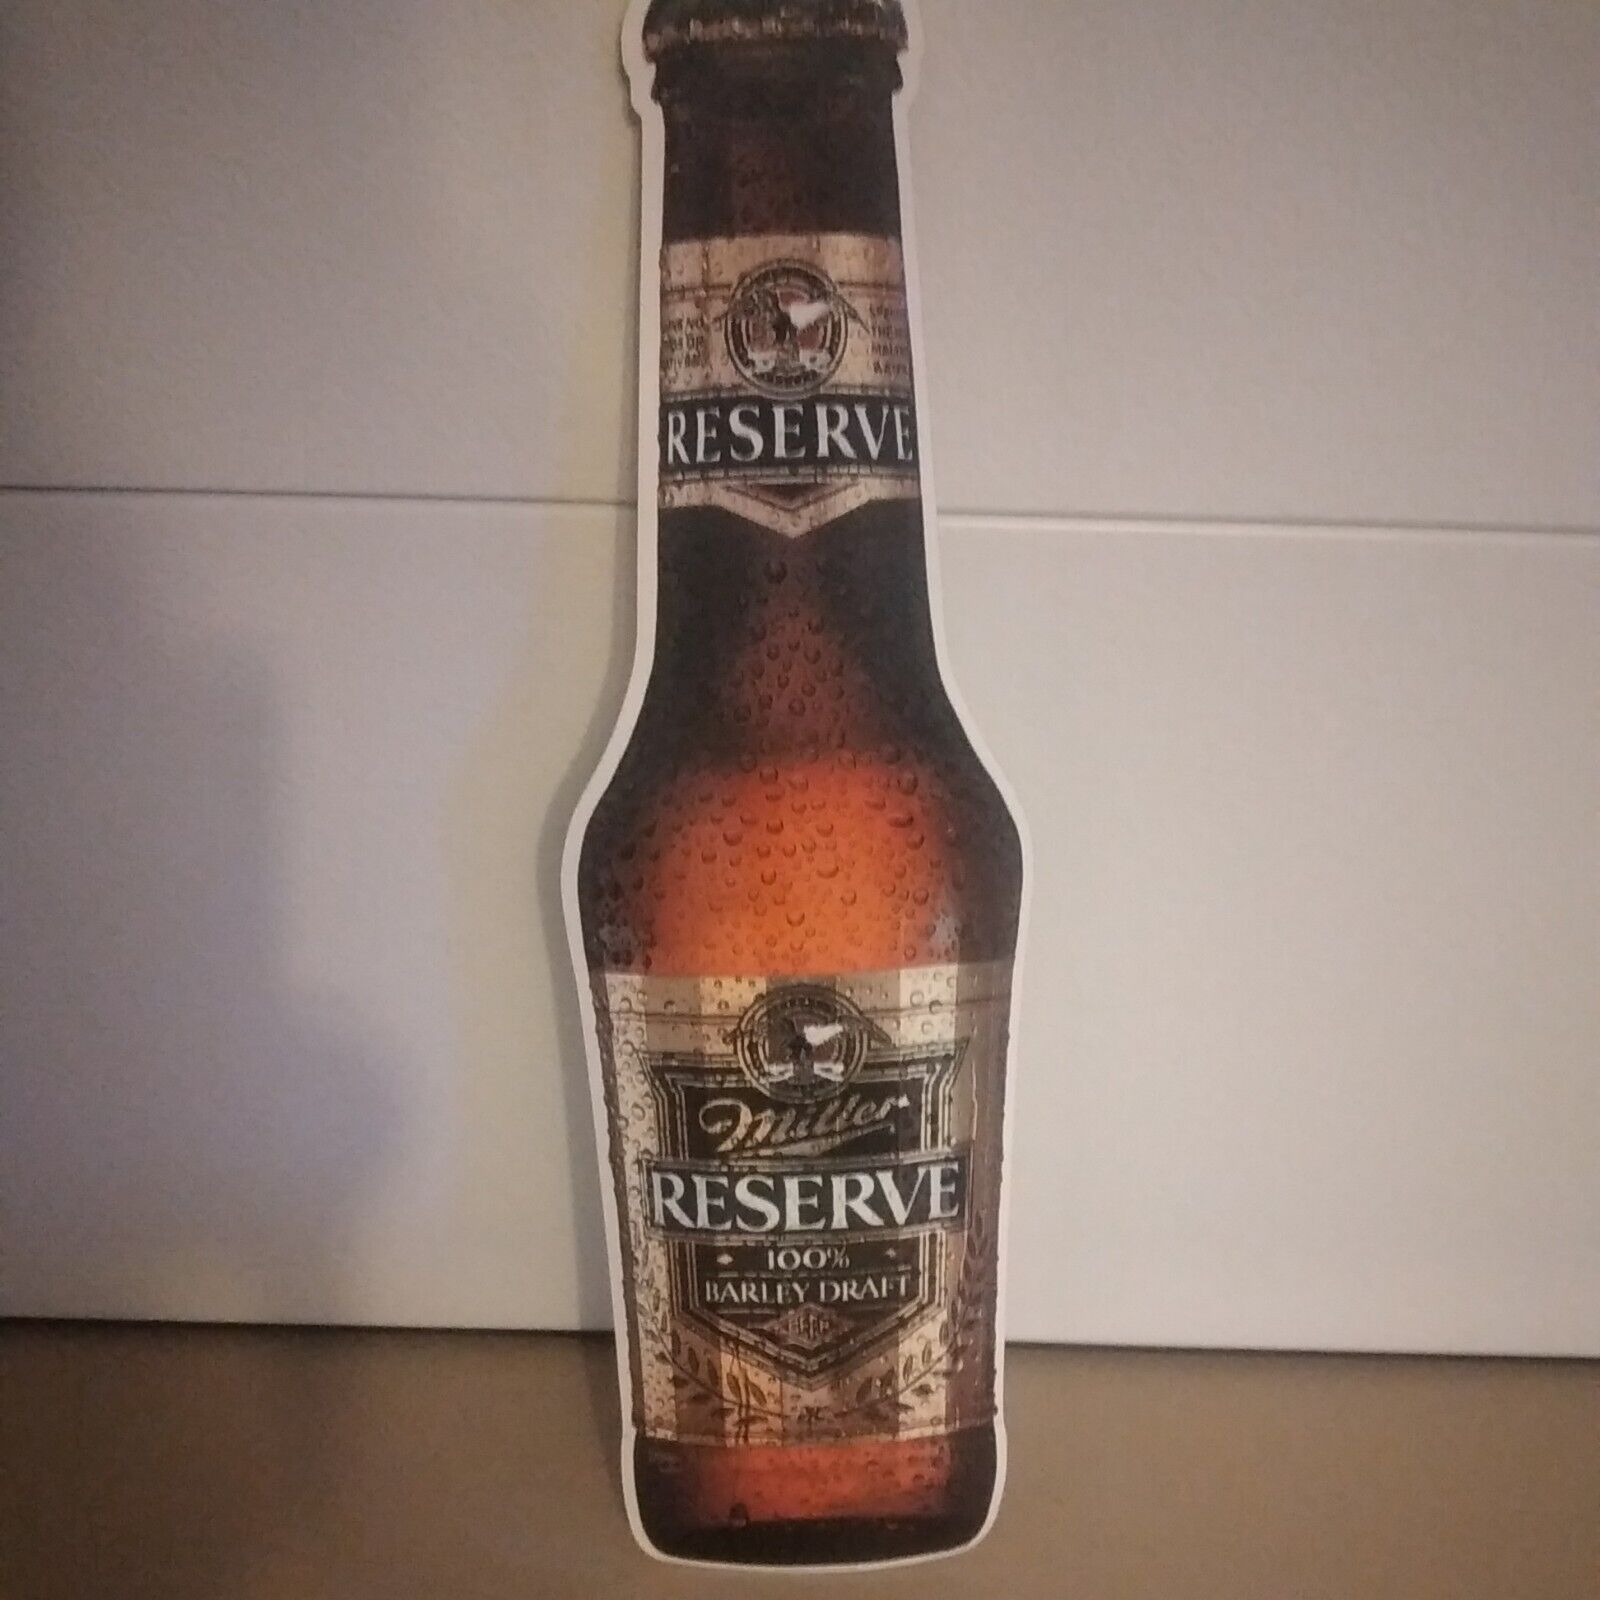 MILLER RESERVE BEER SIGN BY MILLER BREWING CO. VERY RARE 100% BARLEY COLLECTIBLE